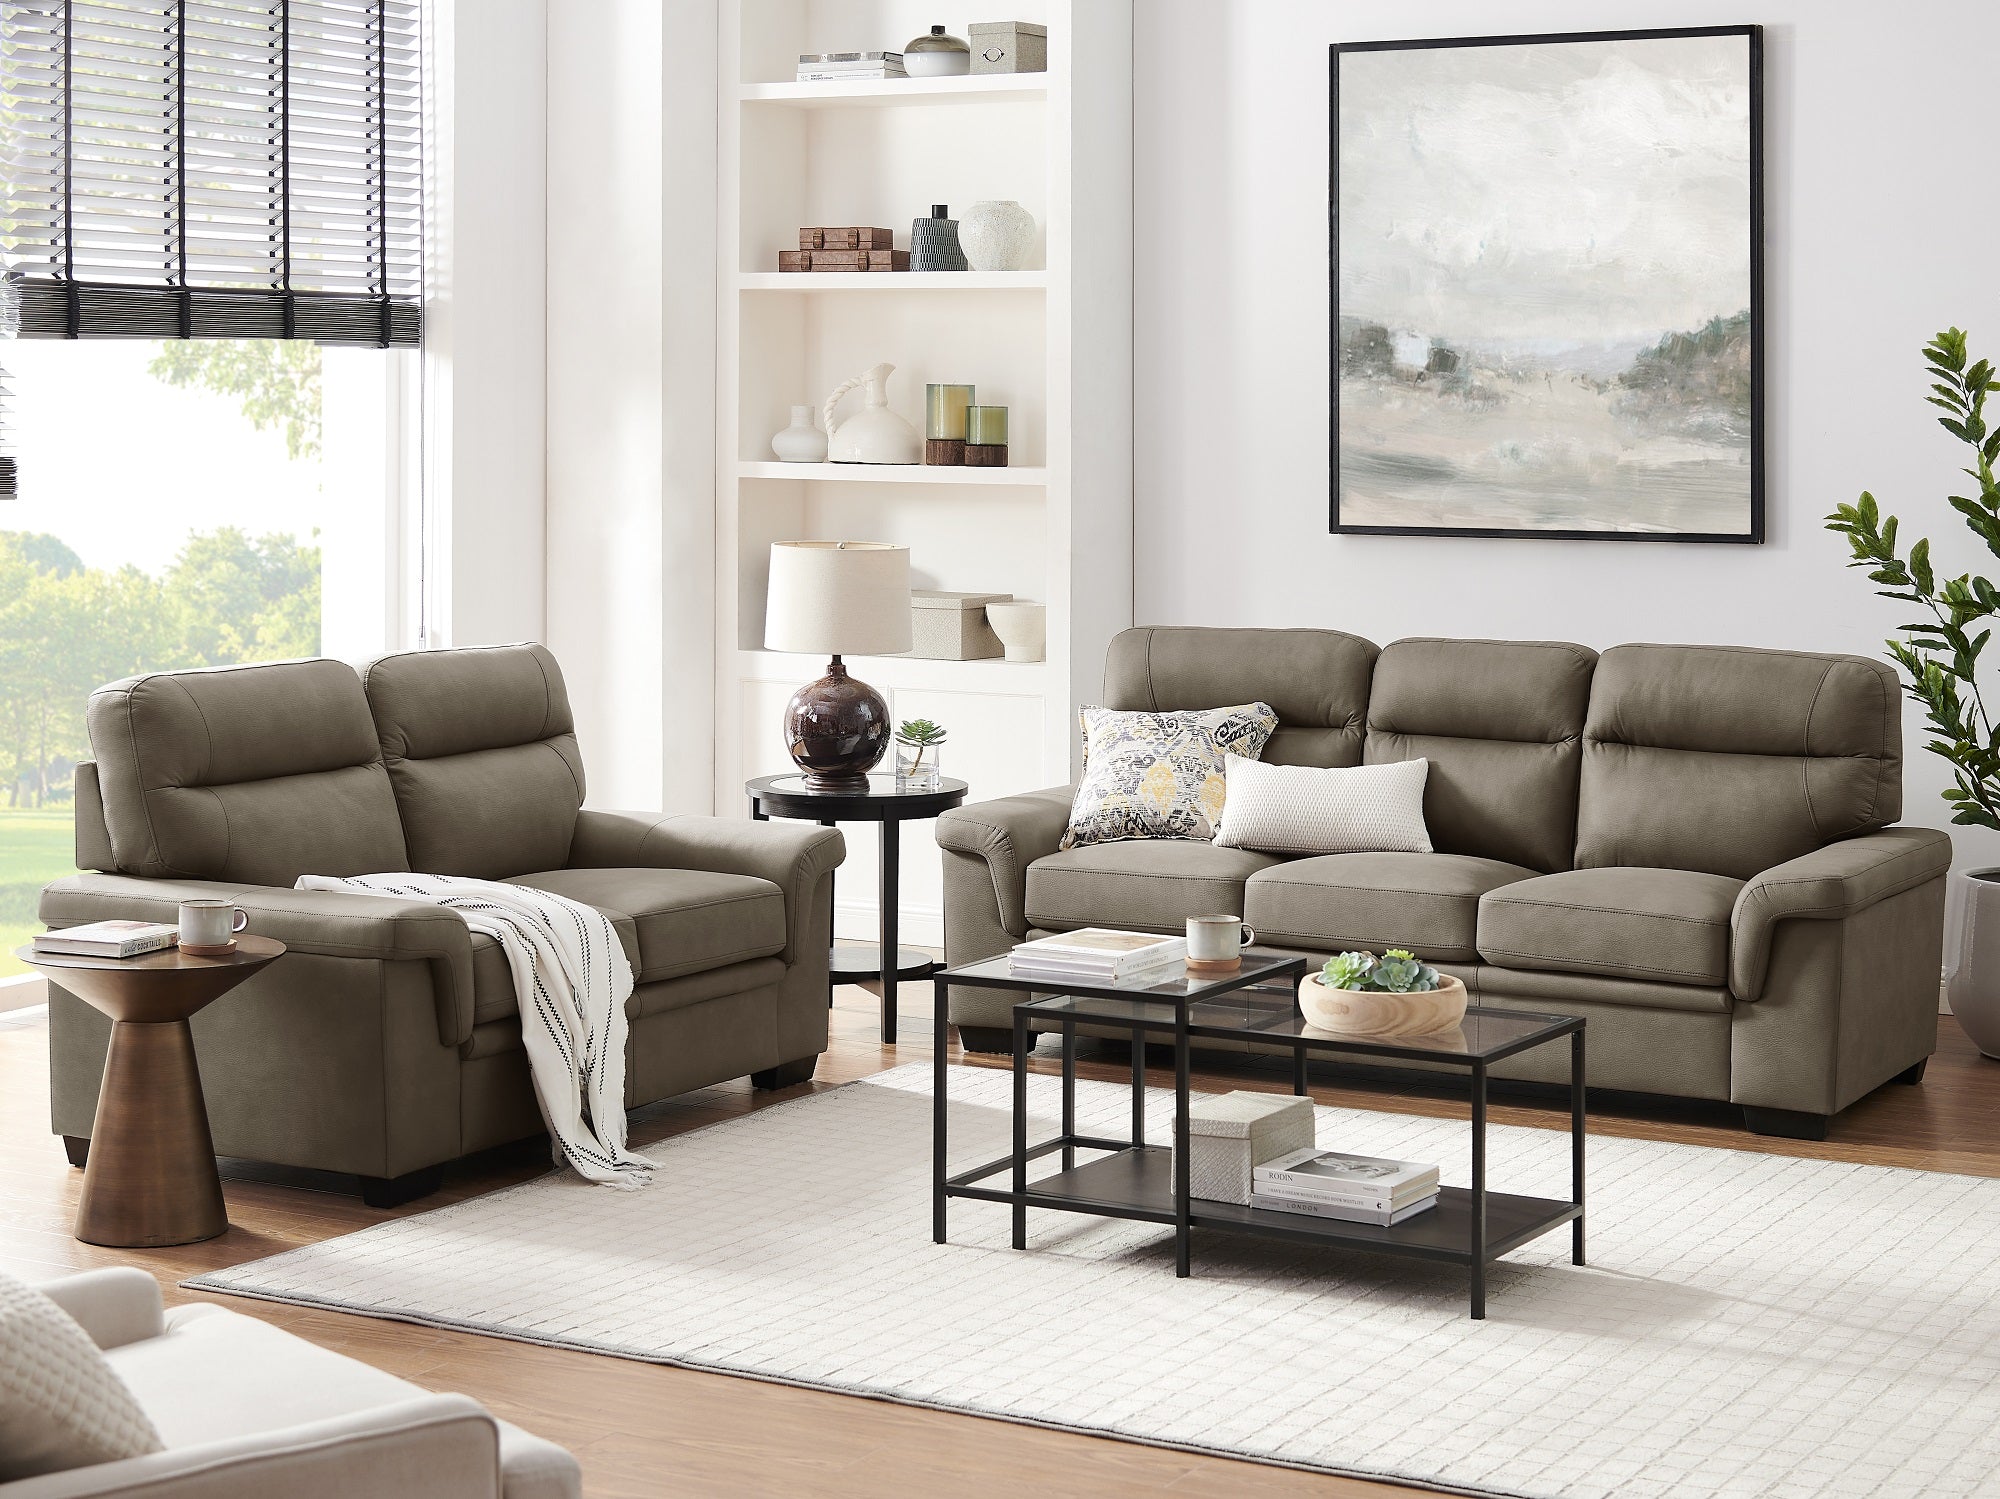 Modern living room furniture set with couch, coffee table, and armchairs. Shop A2Z Furniture Parkwood for affordable living room sets!